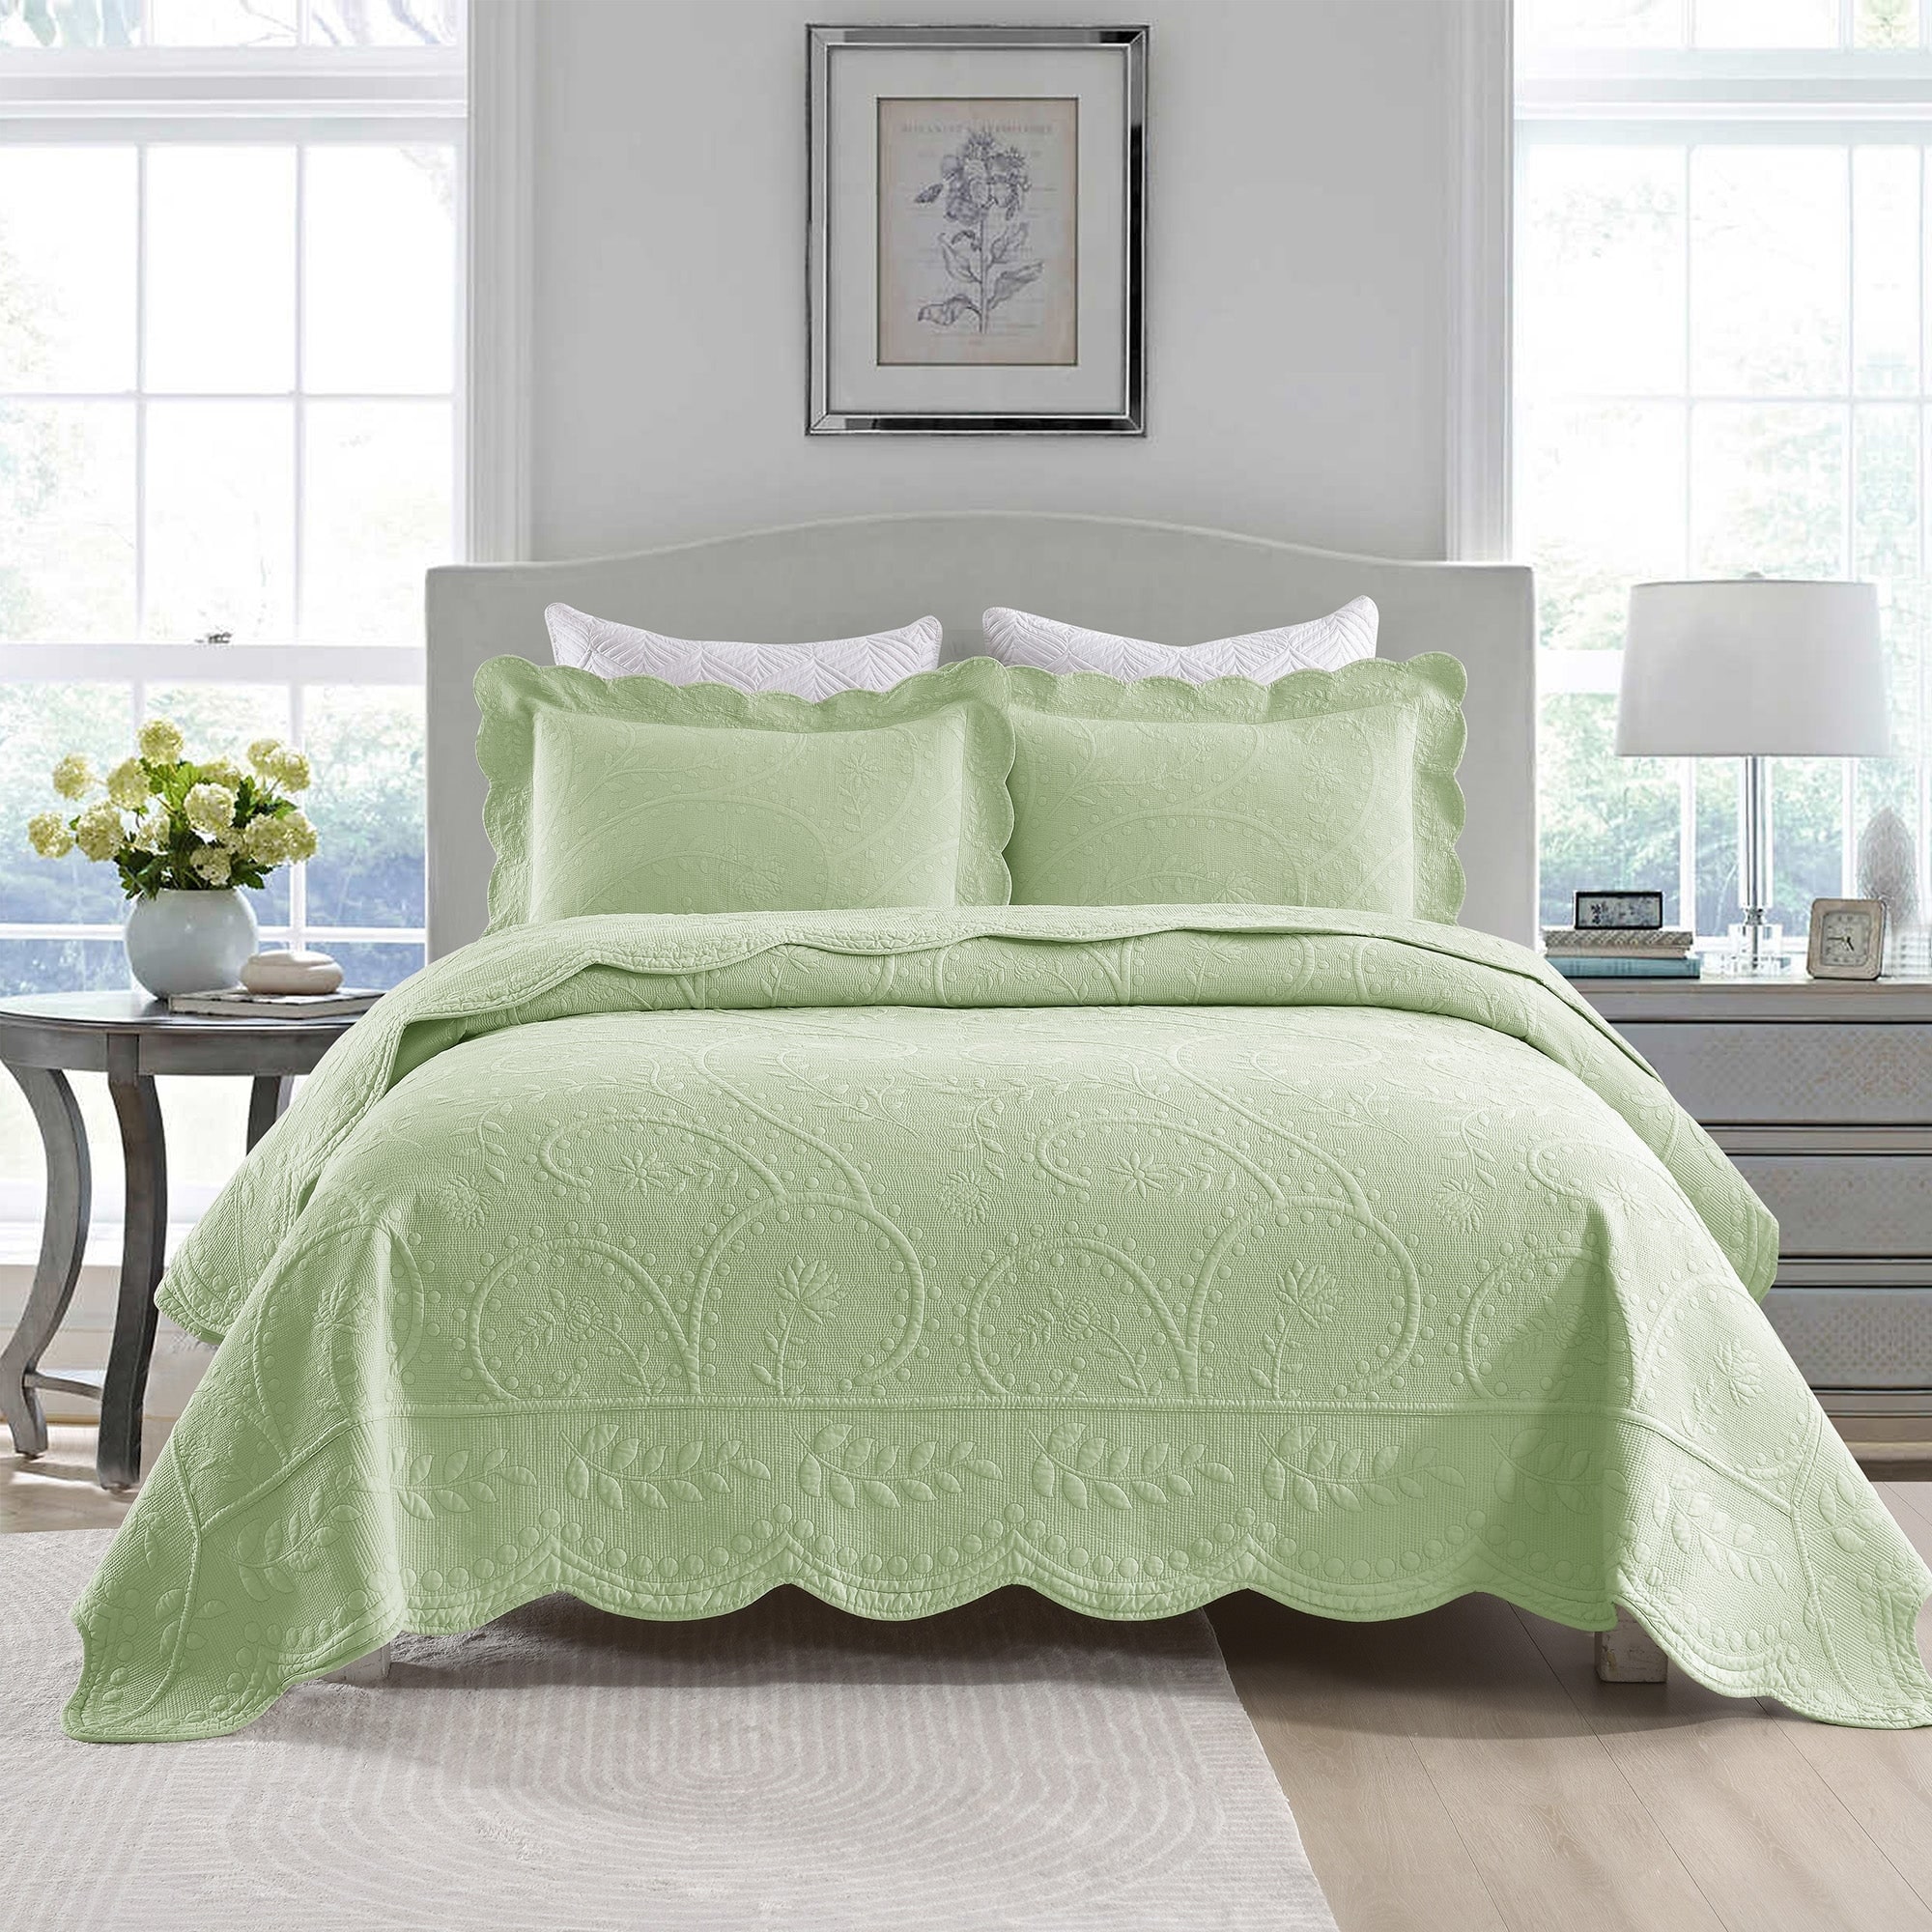 Queen Size Cotton Quilts and Bedspreads - Bed Bath & Beyond